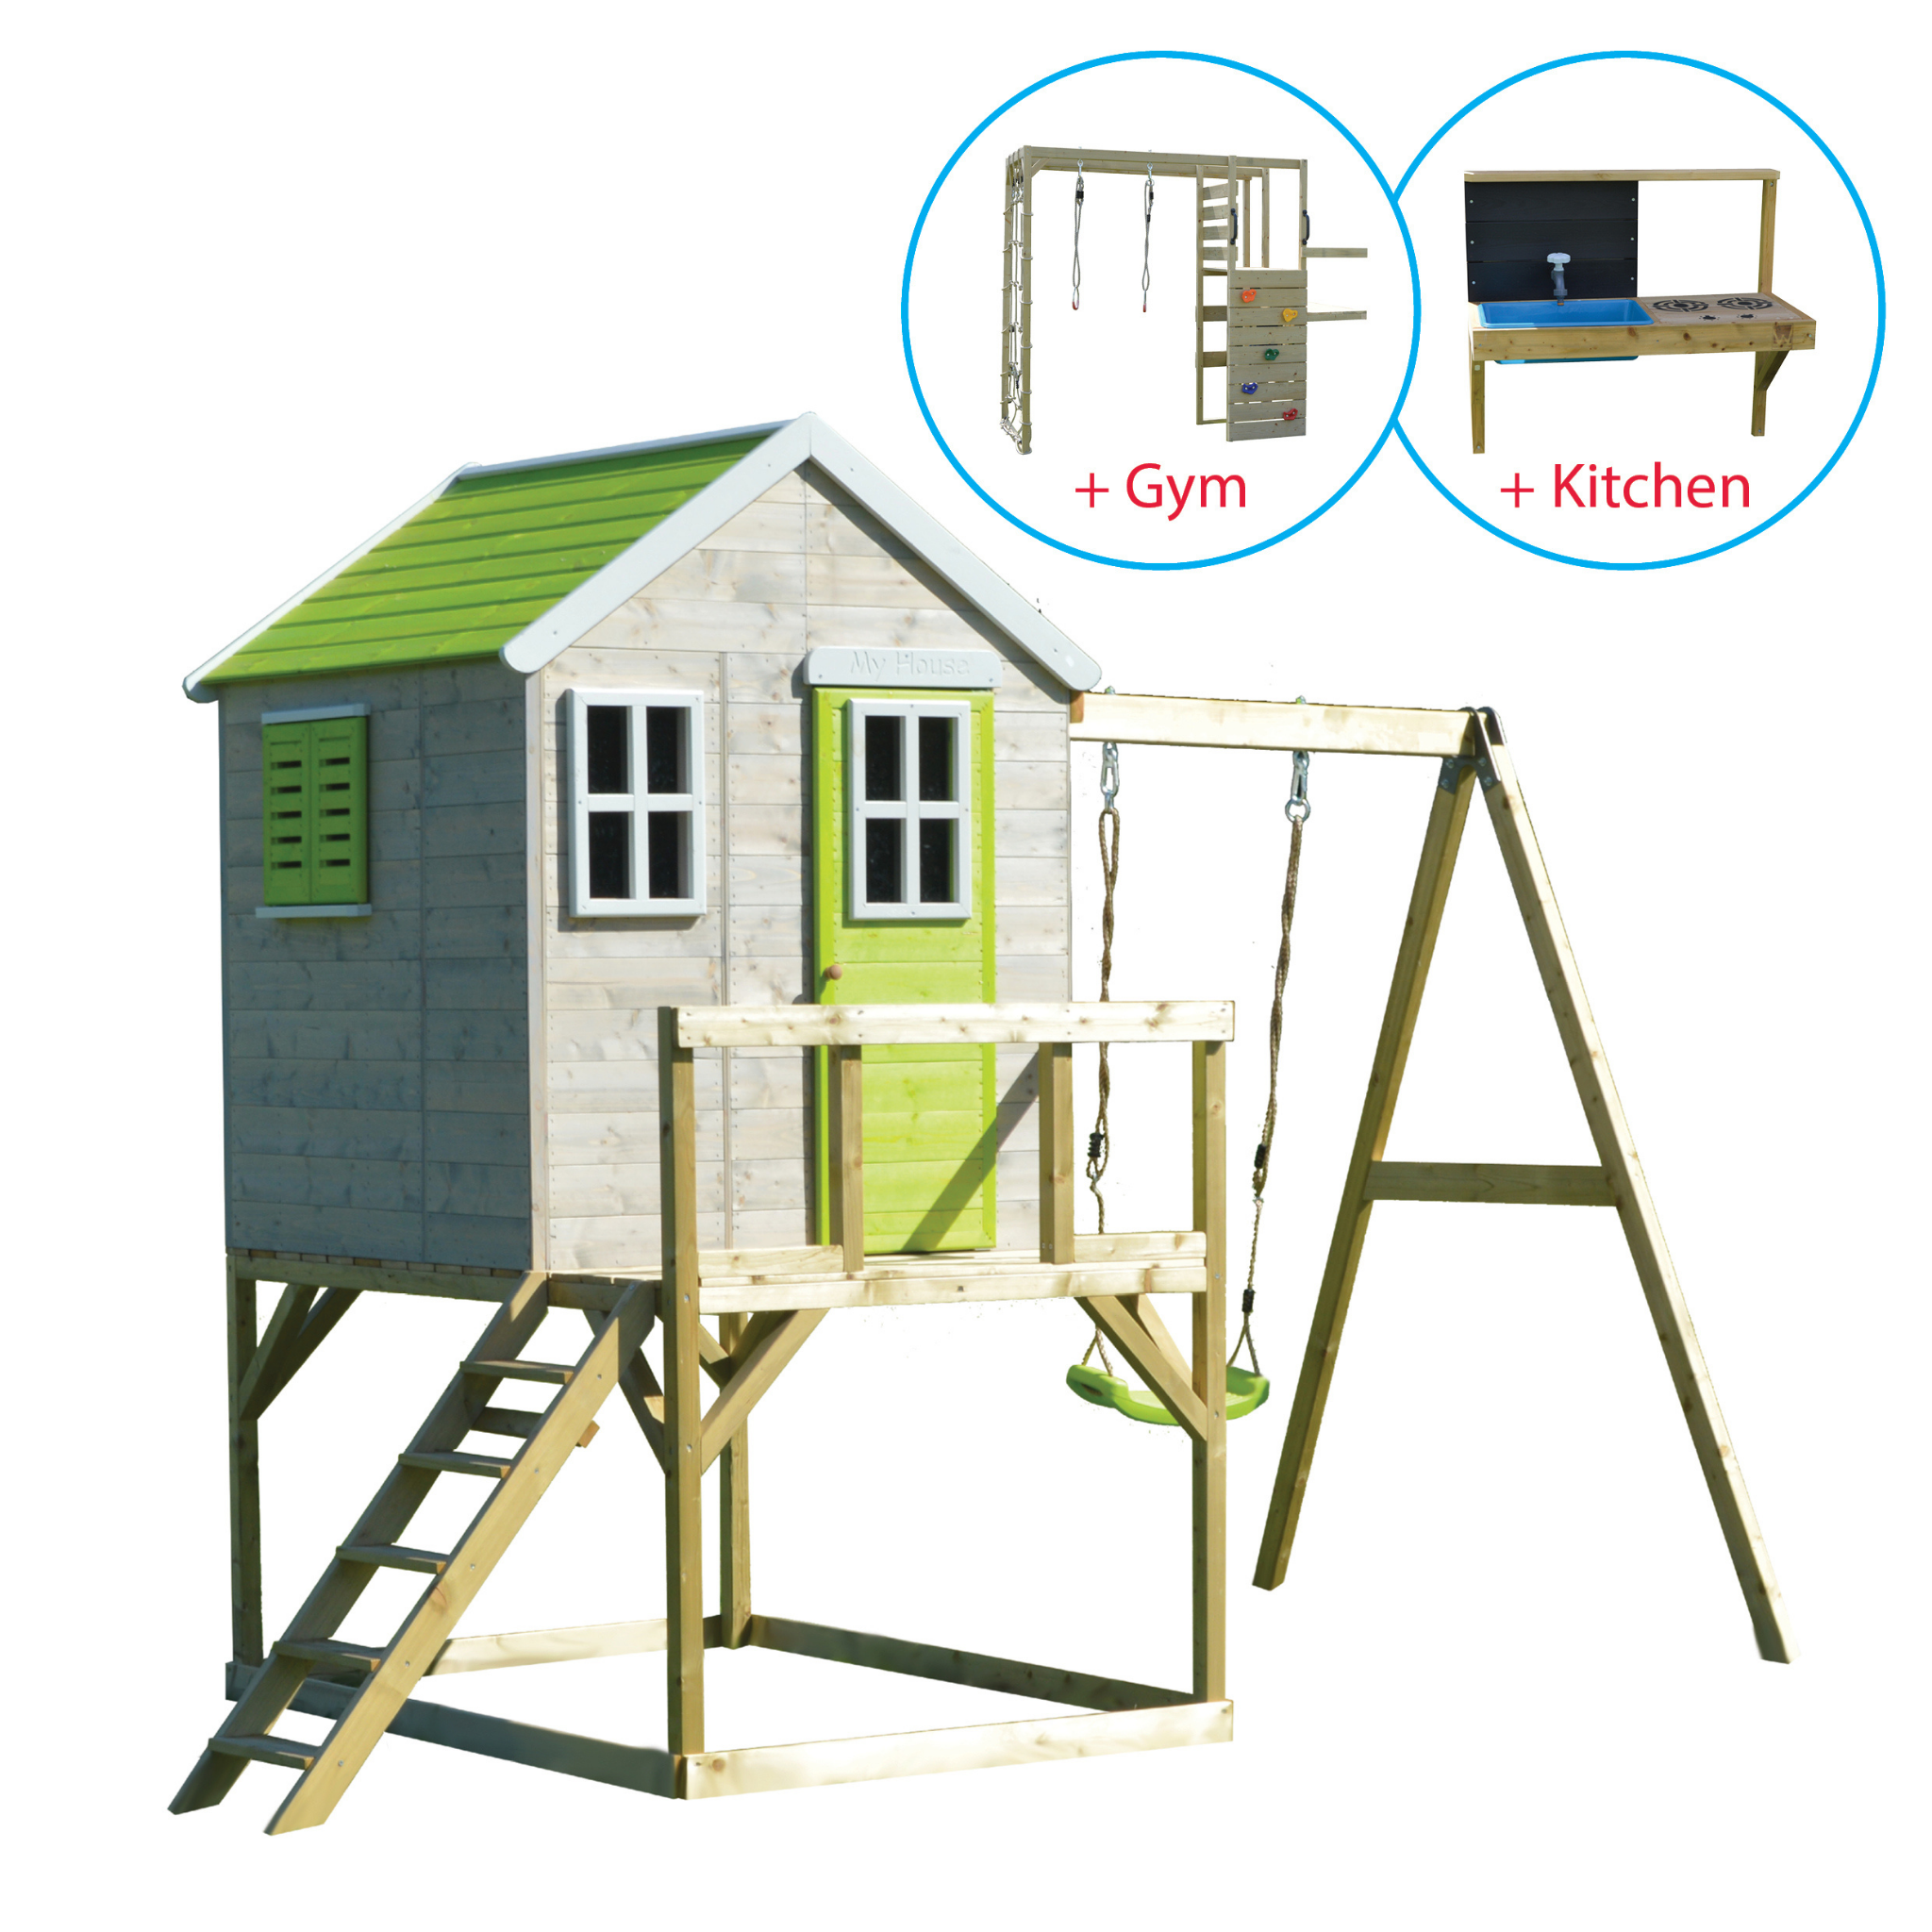 M23-GK My Lodge with Platform and Single Swing + Gym & Kitchen Attachment